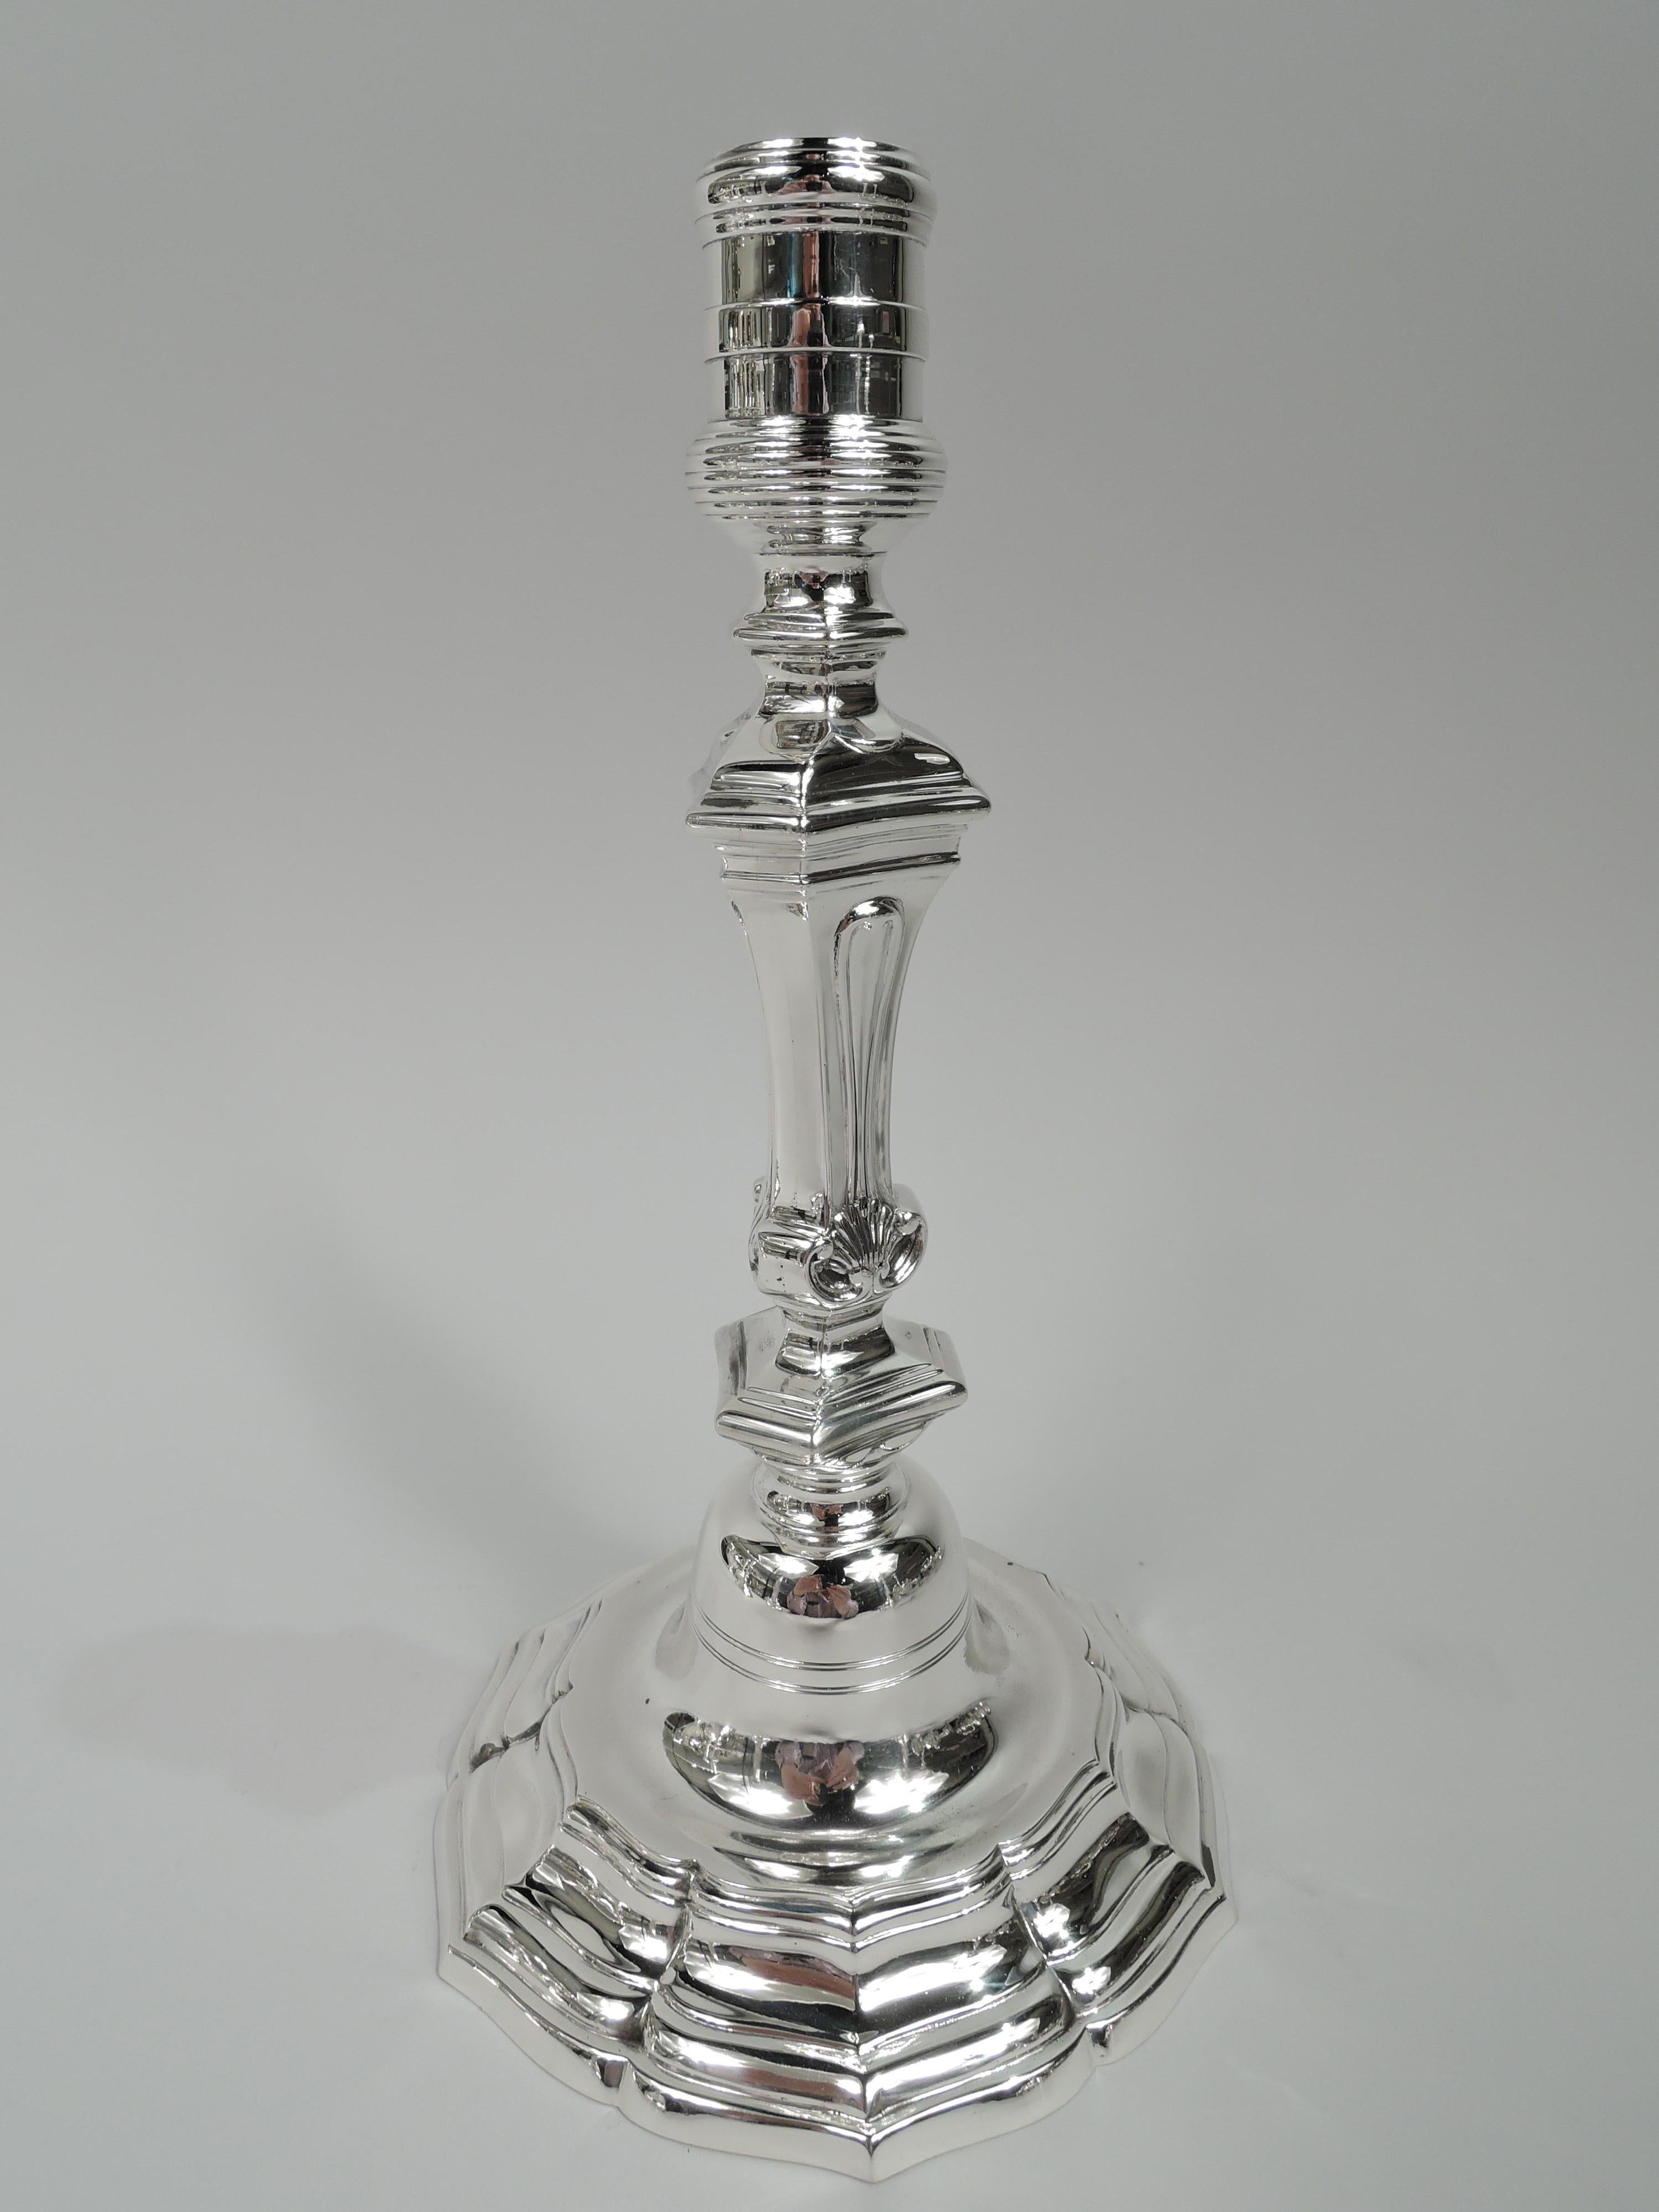 Pair of Baroque-style sterling silver candlesticks. Made by Tiffany & Co. in New York, ca 1916. Each: Reeded and bellied socket on tapering and chamfered shaft. Foot domed in round and concave base with ogee rim. Faceted. Scallop shells and engraved